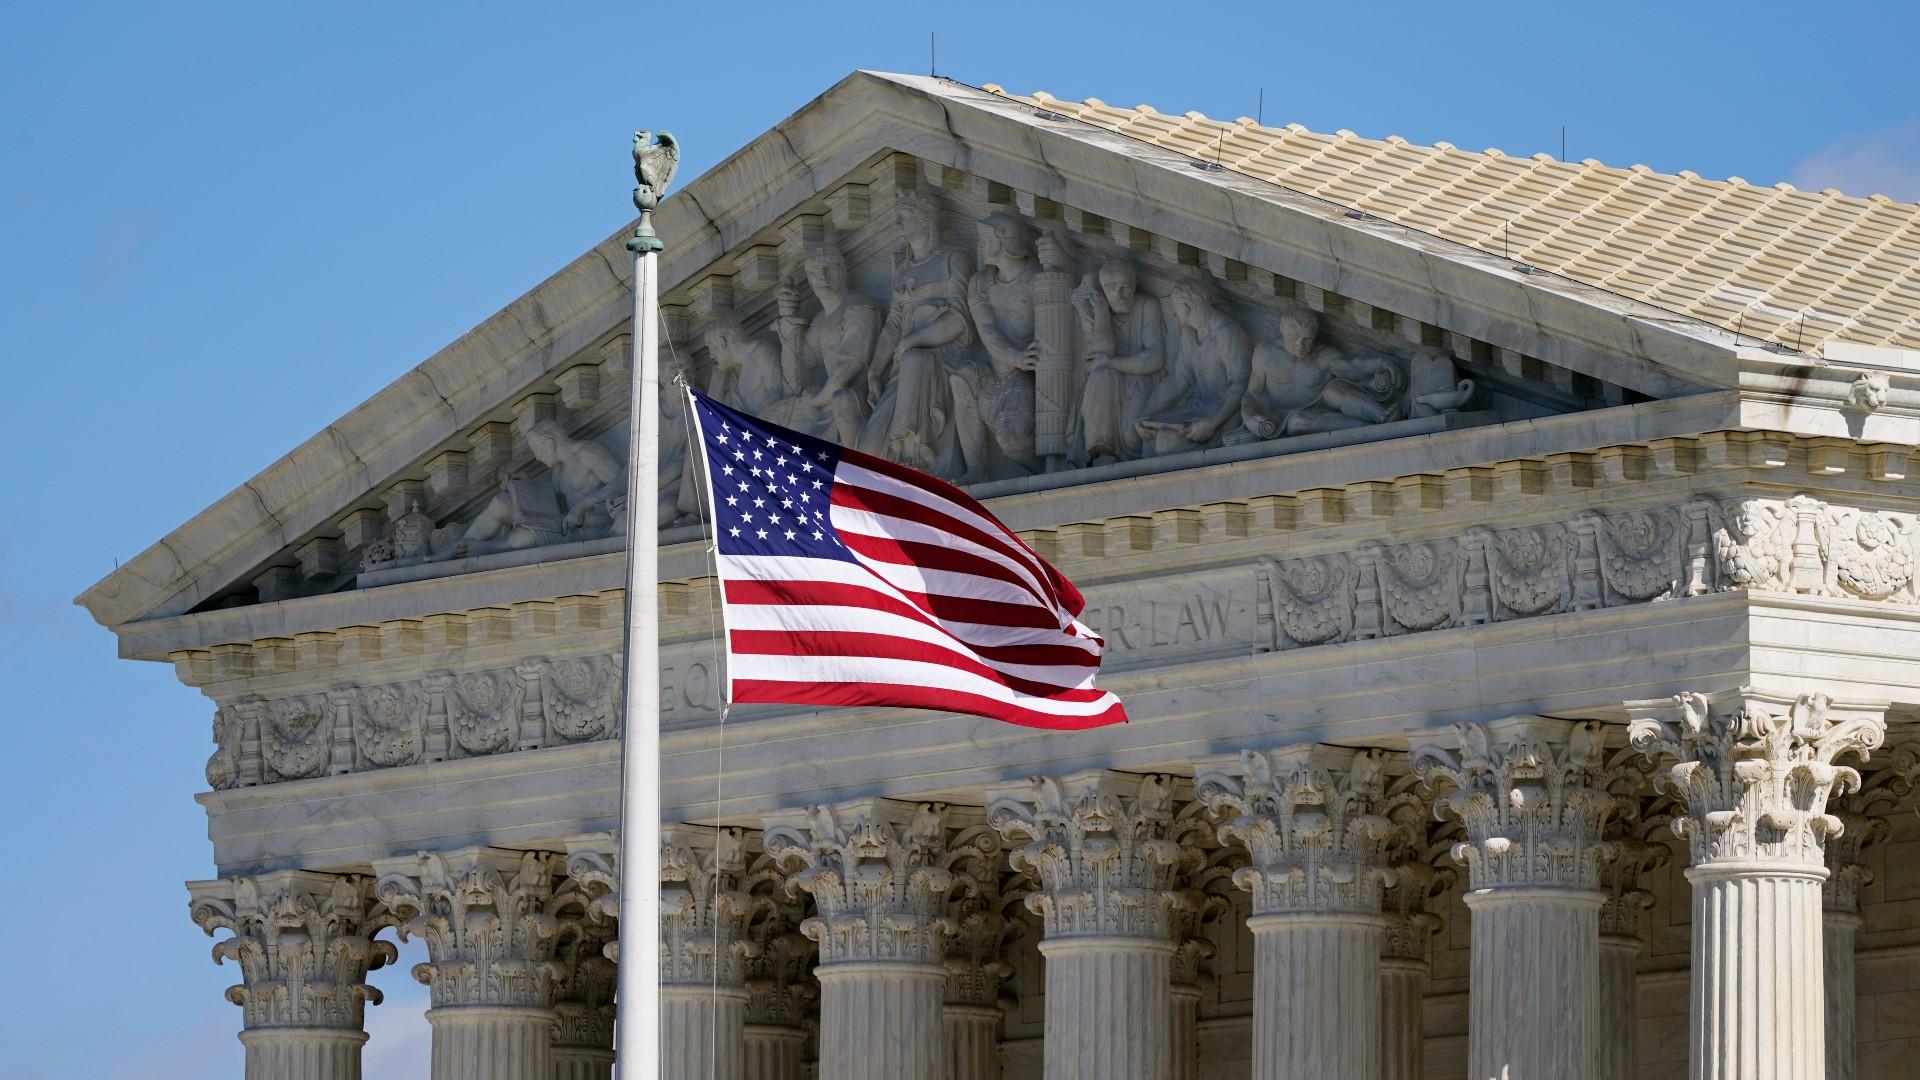 An American flag waves in front of the Supreme Court building on Capitol Hill in Washington, Nov. 2, 2020. (AP Photo / Patrick Semansky, File)